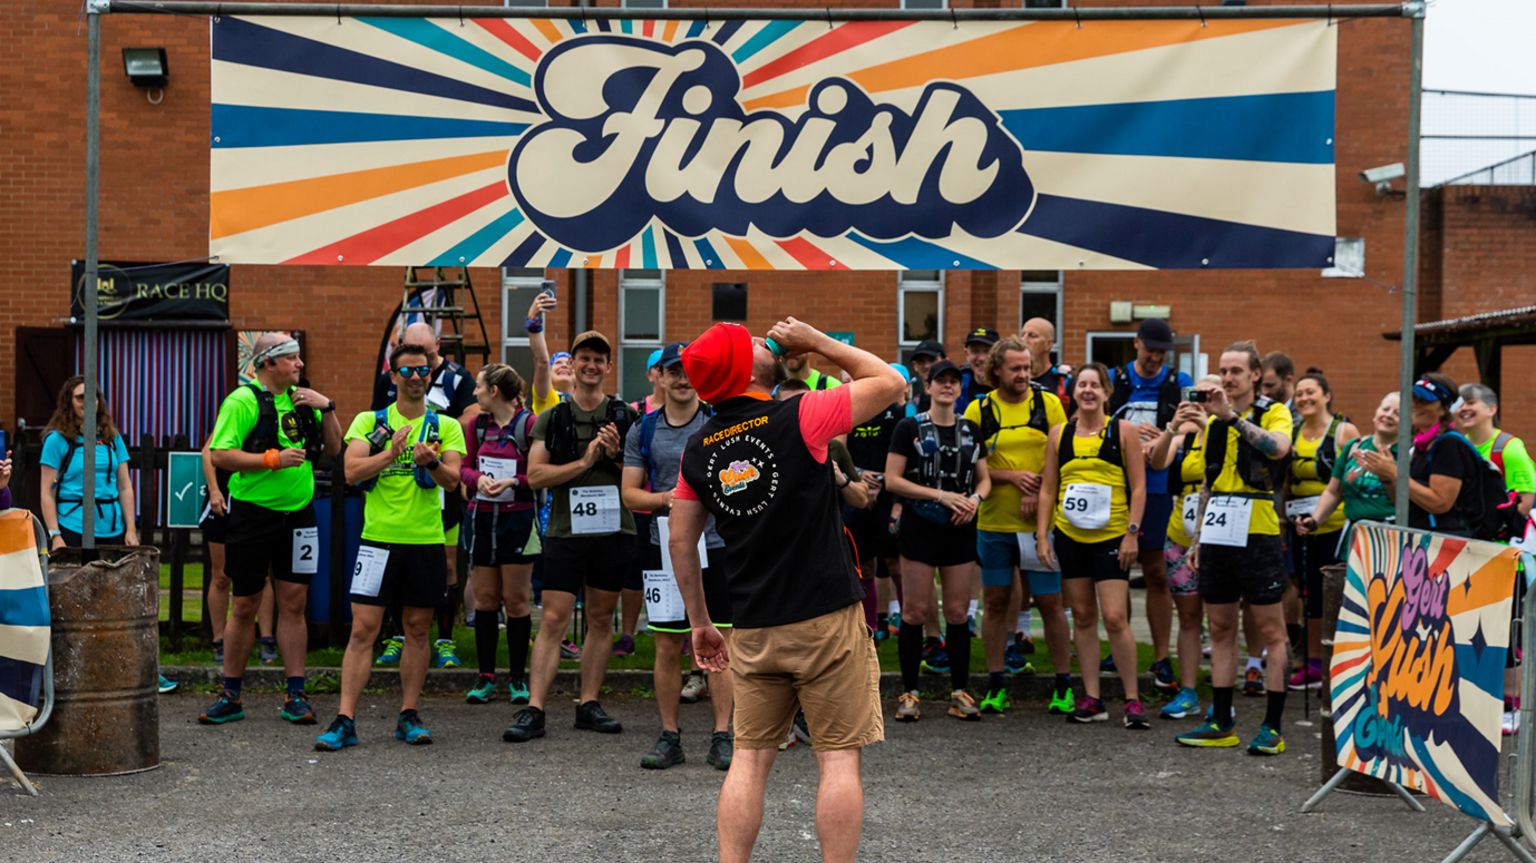 Paul Breen downing a drink in front of participants of another event at the finish line